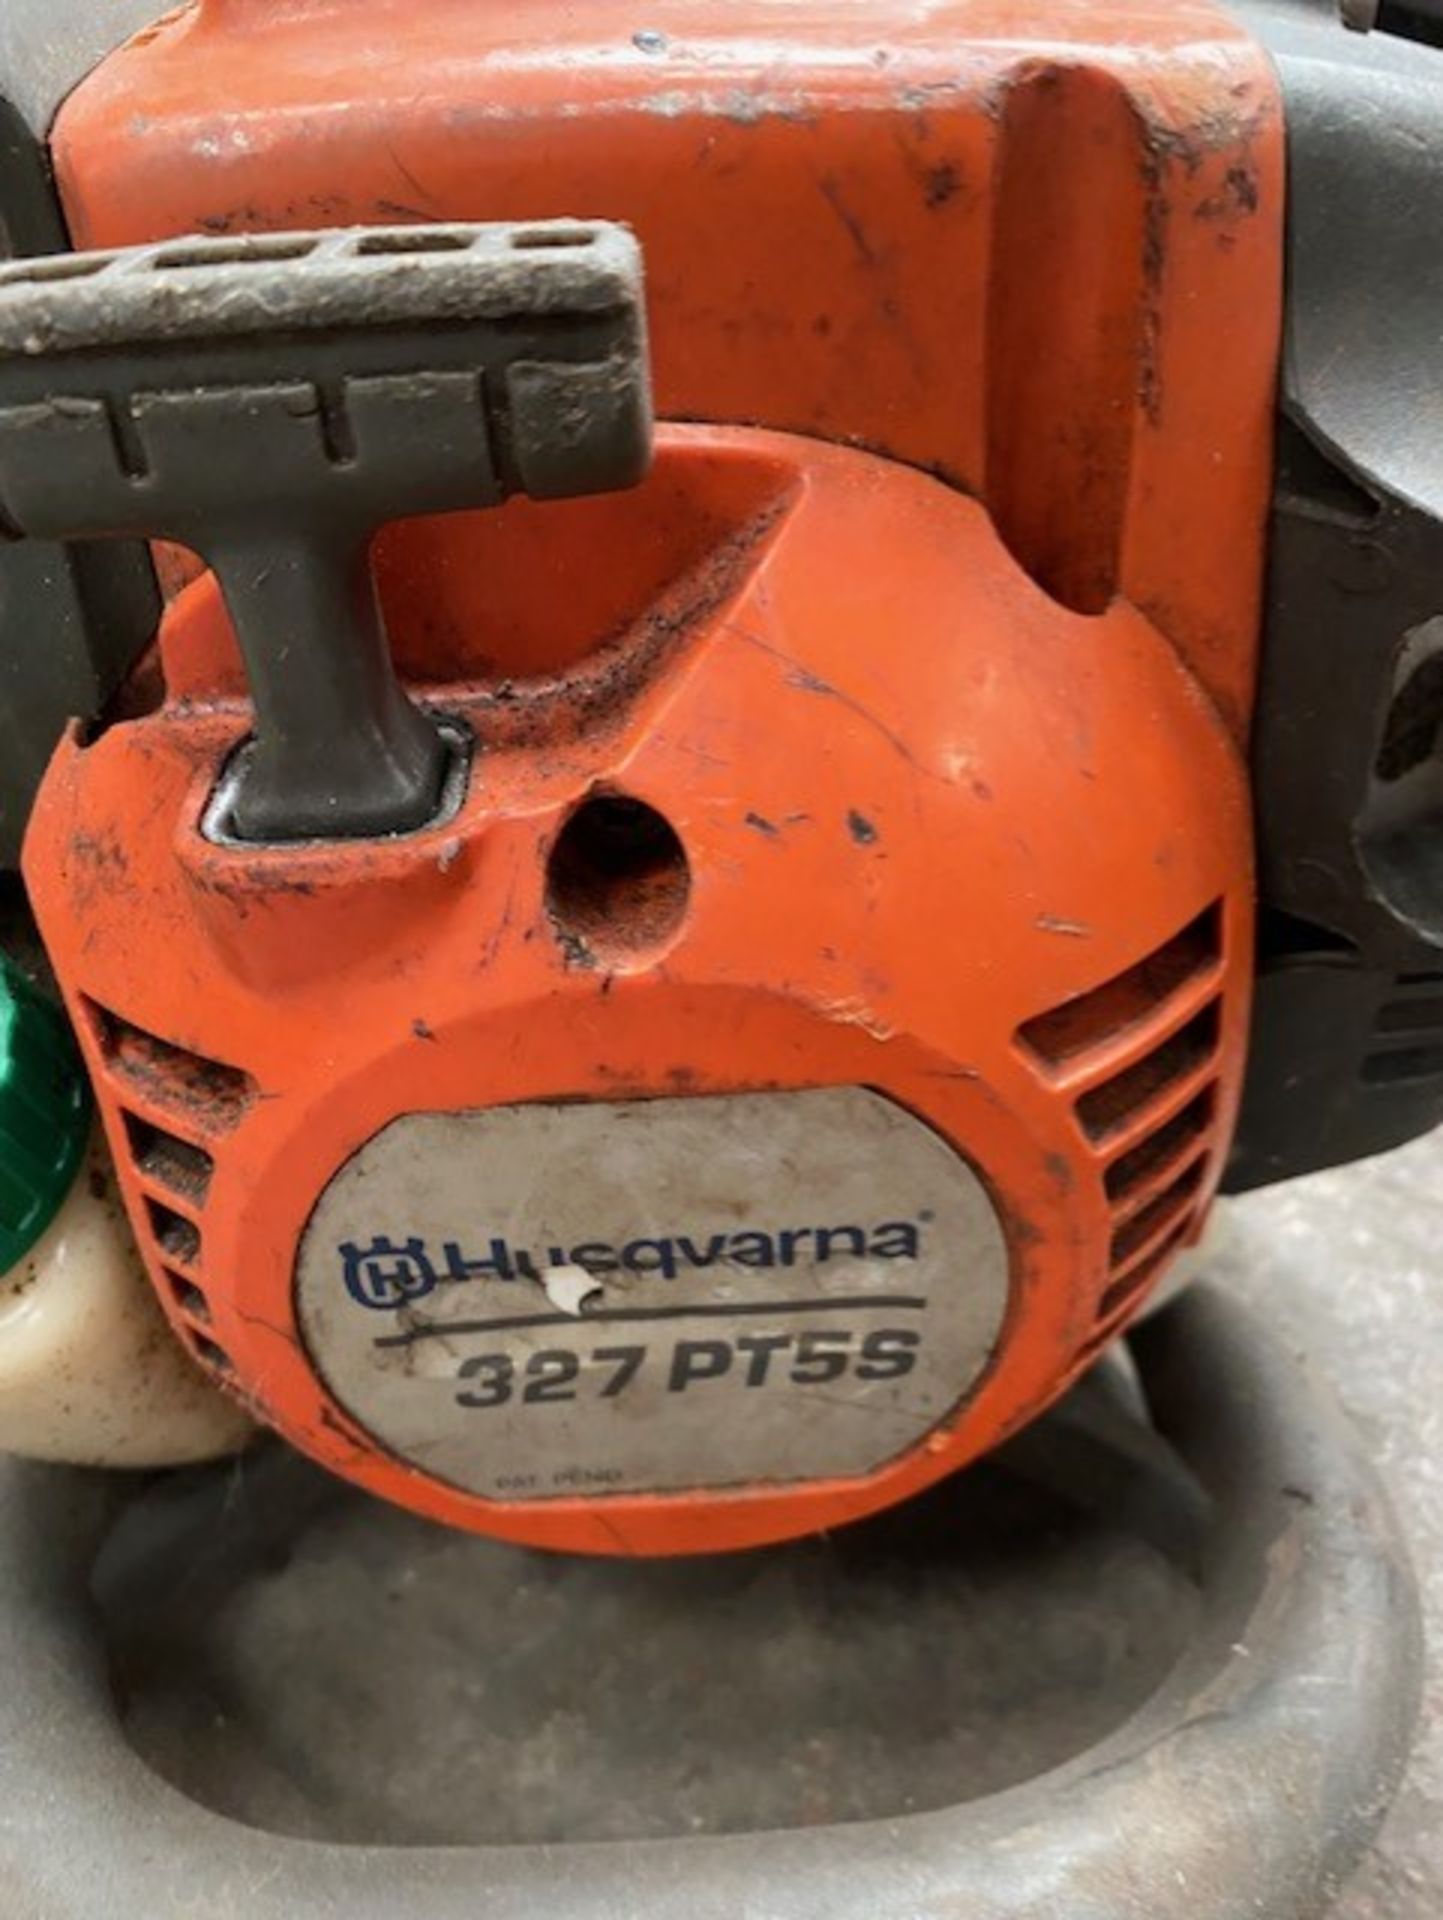 Husqvarna Extra Long Pole saw as seen in video - Image 3 of 3